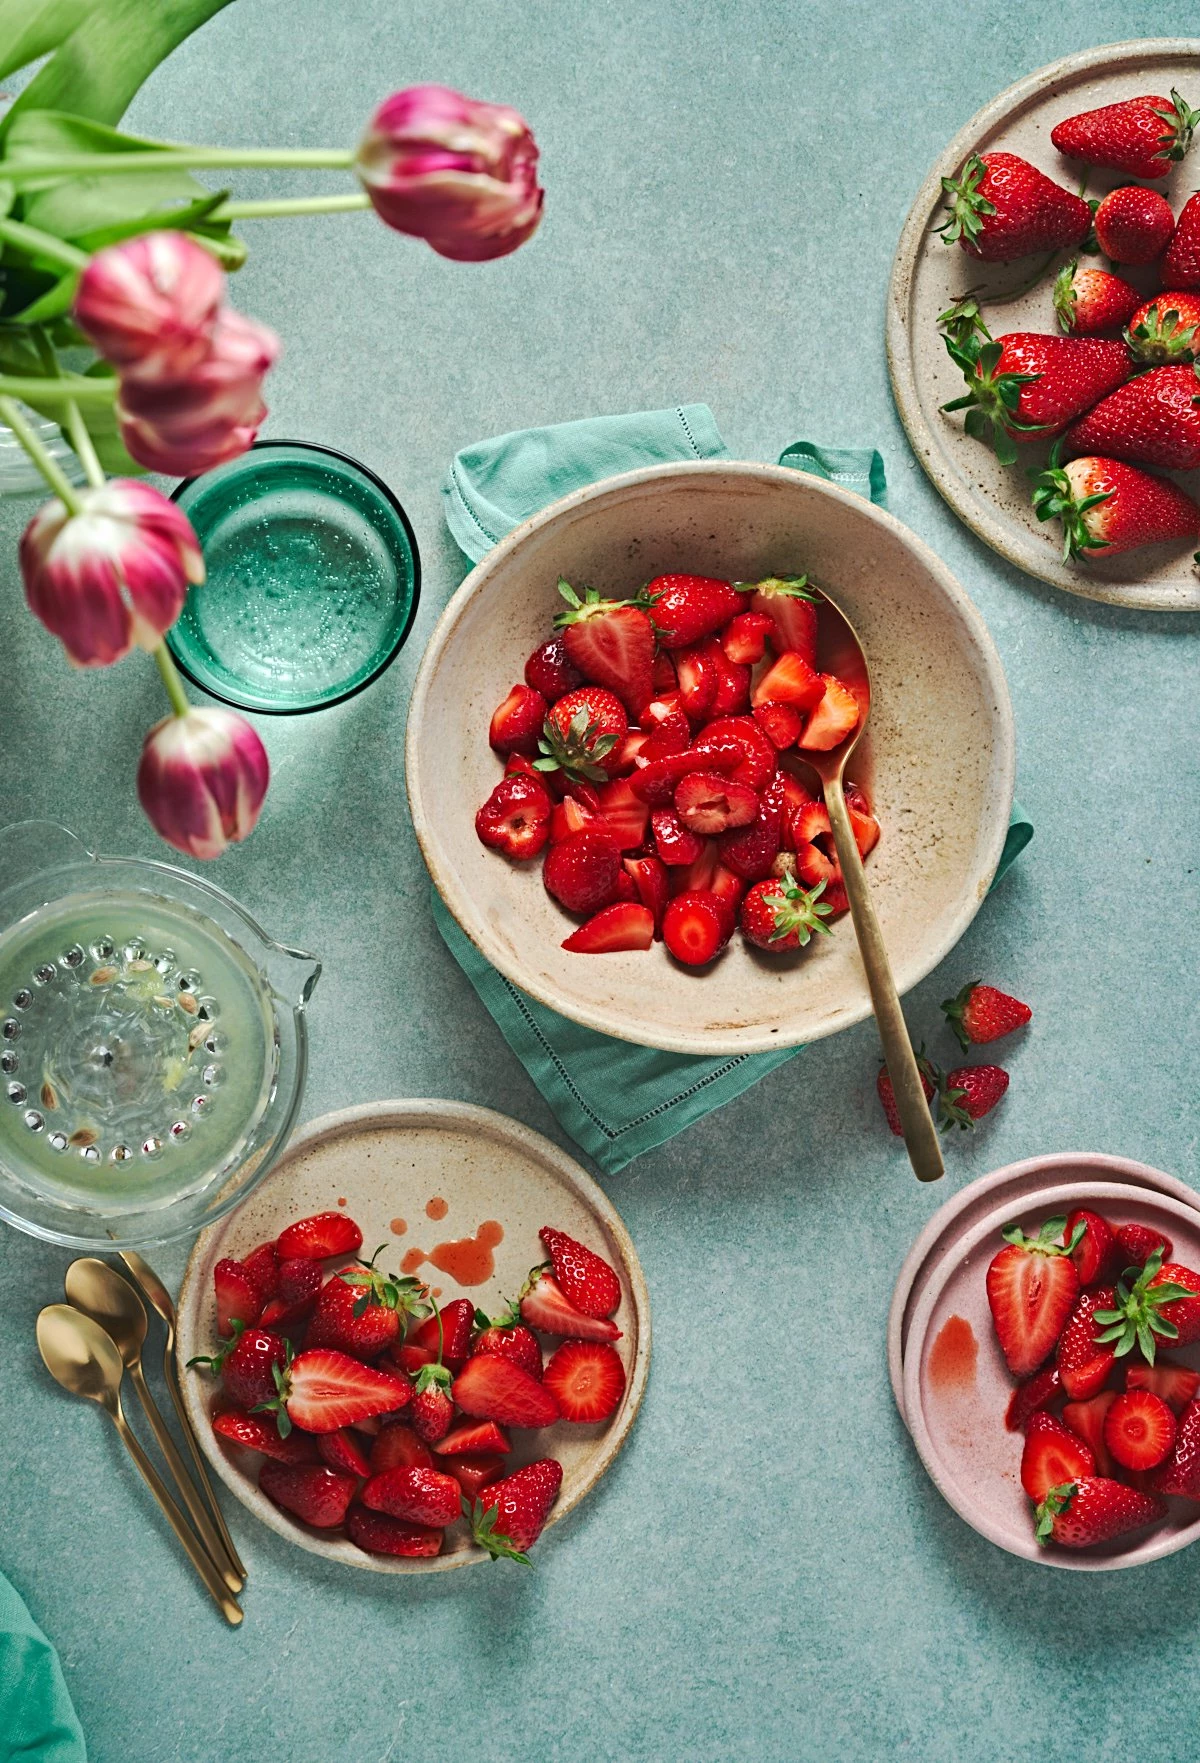 A spring table with fresh sliced strawberries, arranged on plates in soft tones. The light gently il...